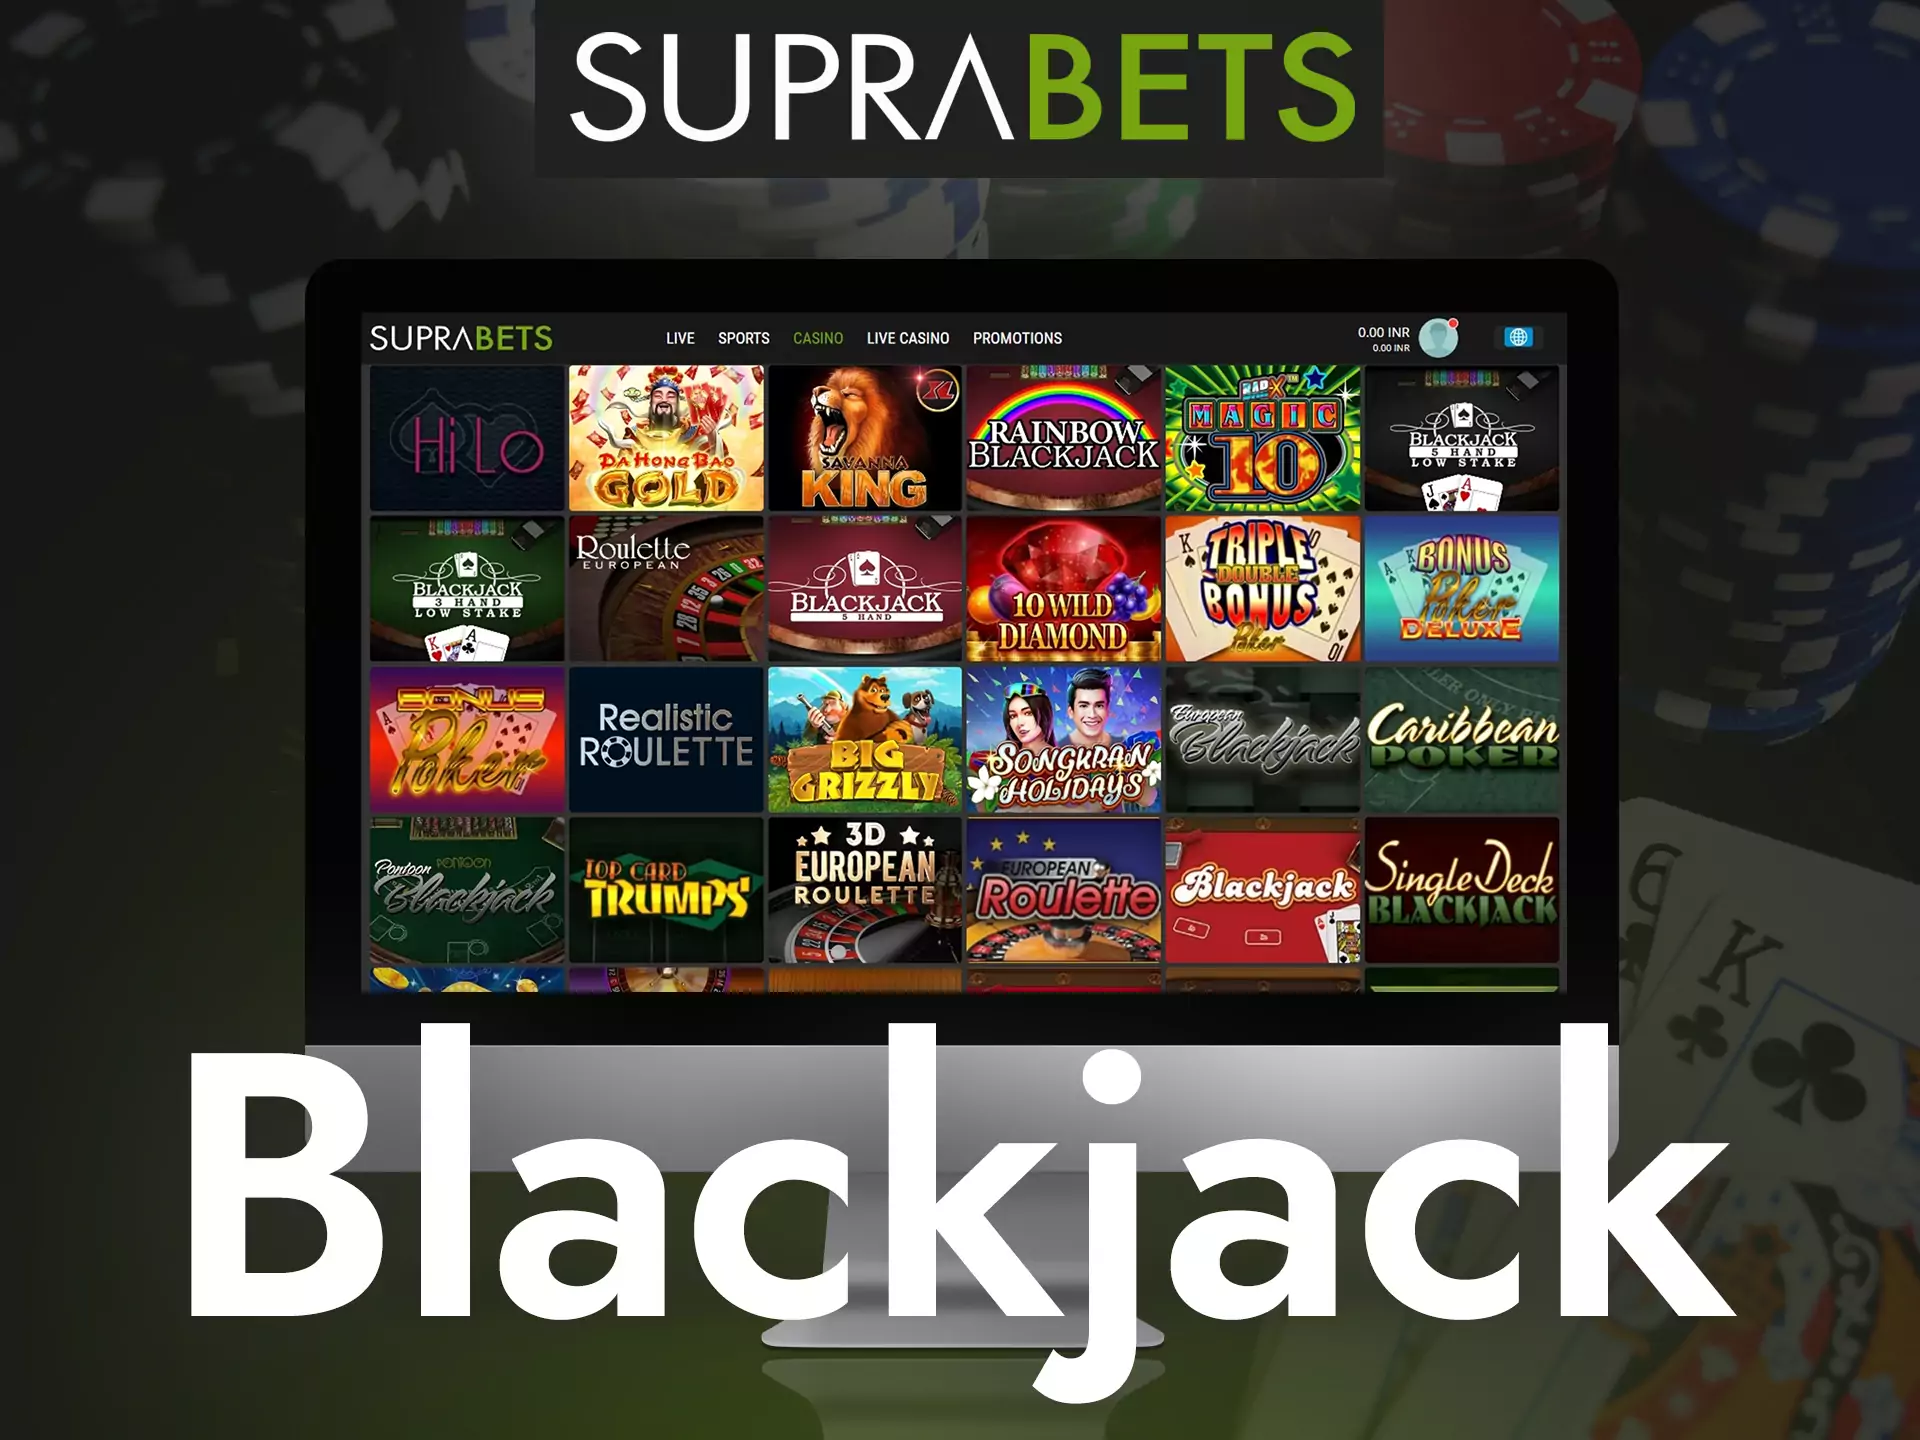 Try playing blackjack at Suprabets Casino if you like card games.